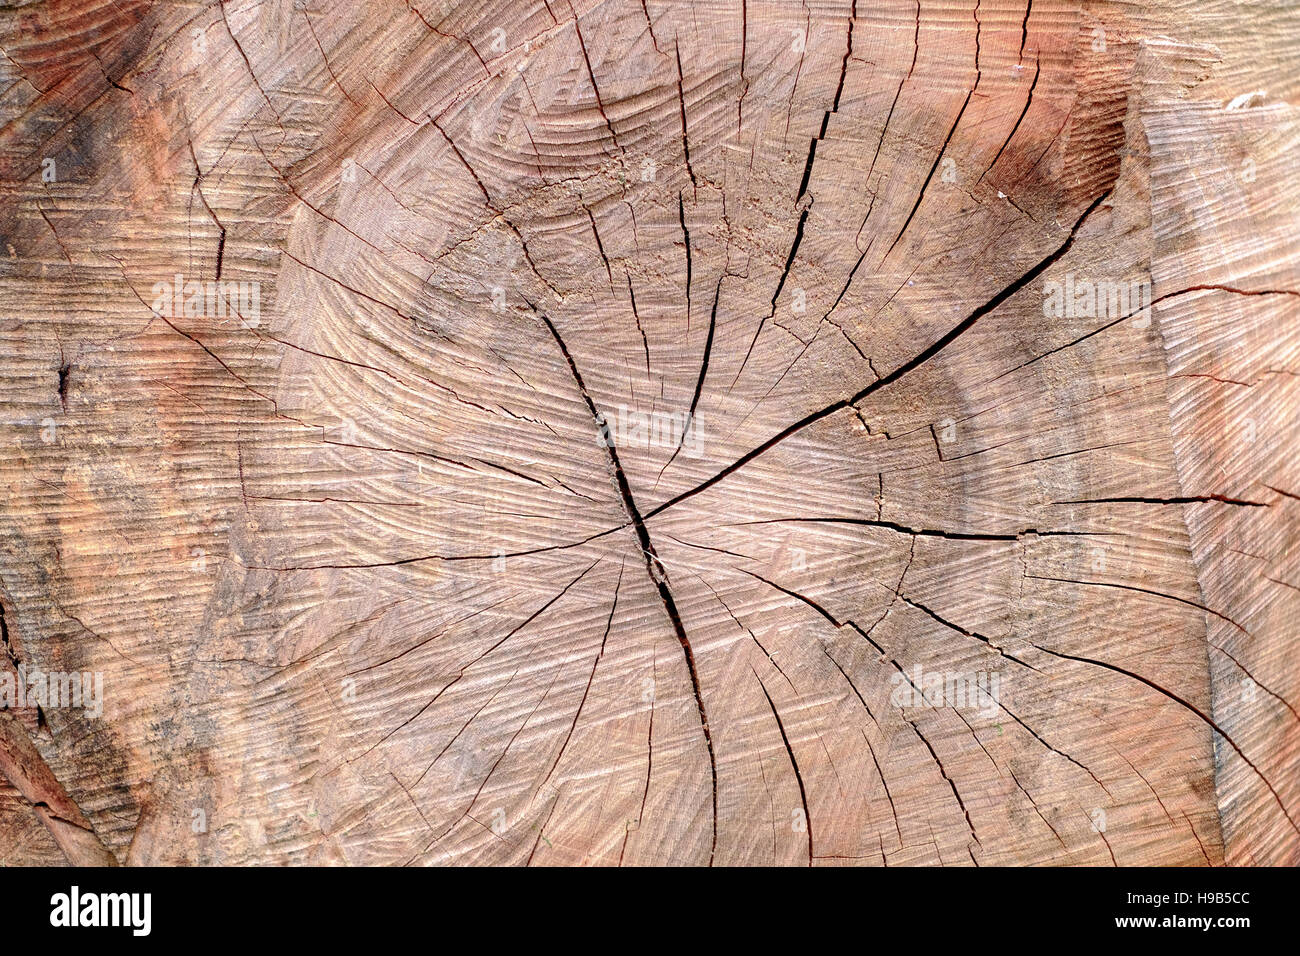 Cherry tree sawed trunk section closeup Stock Photo